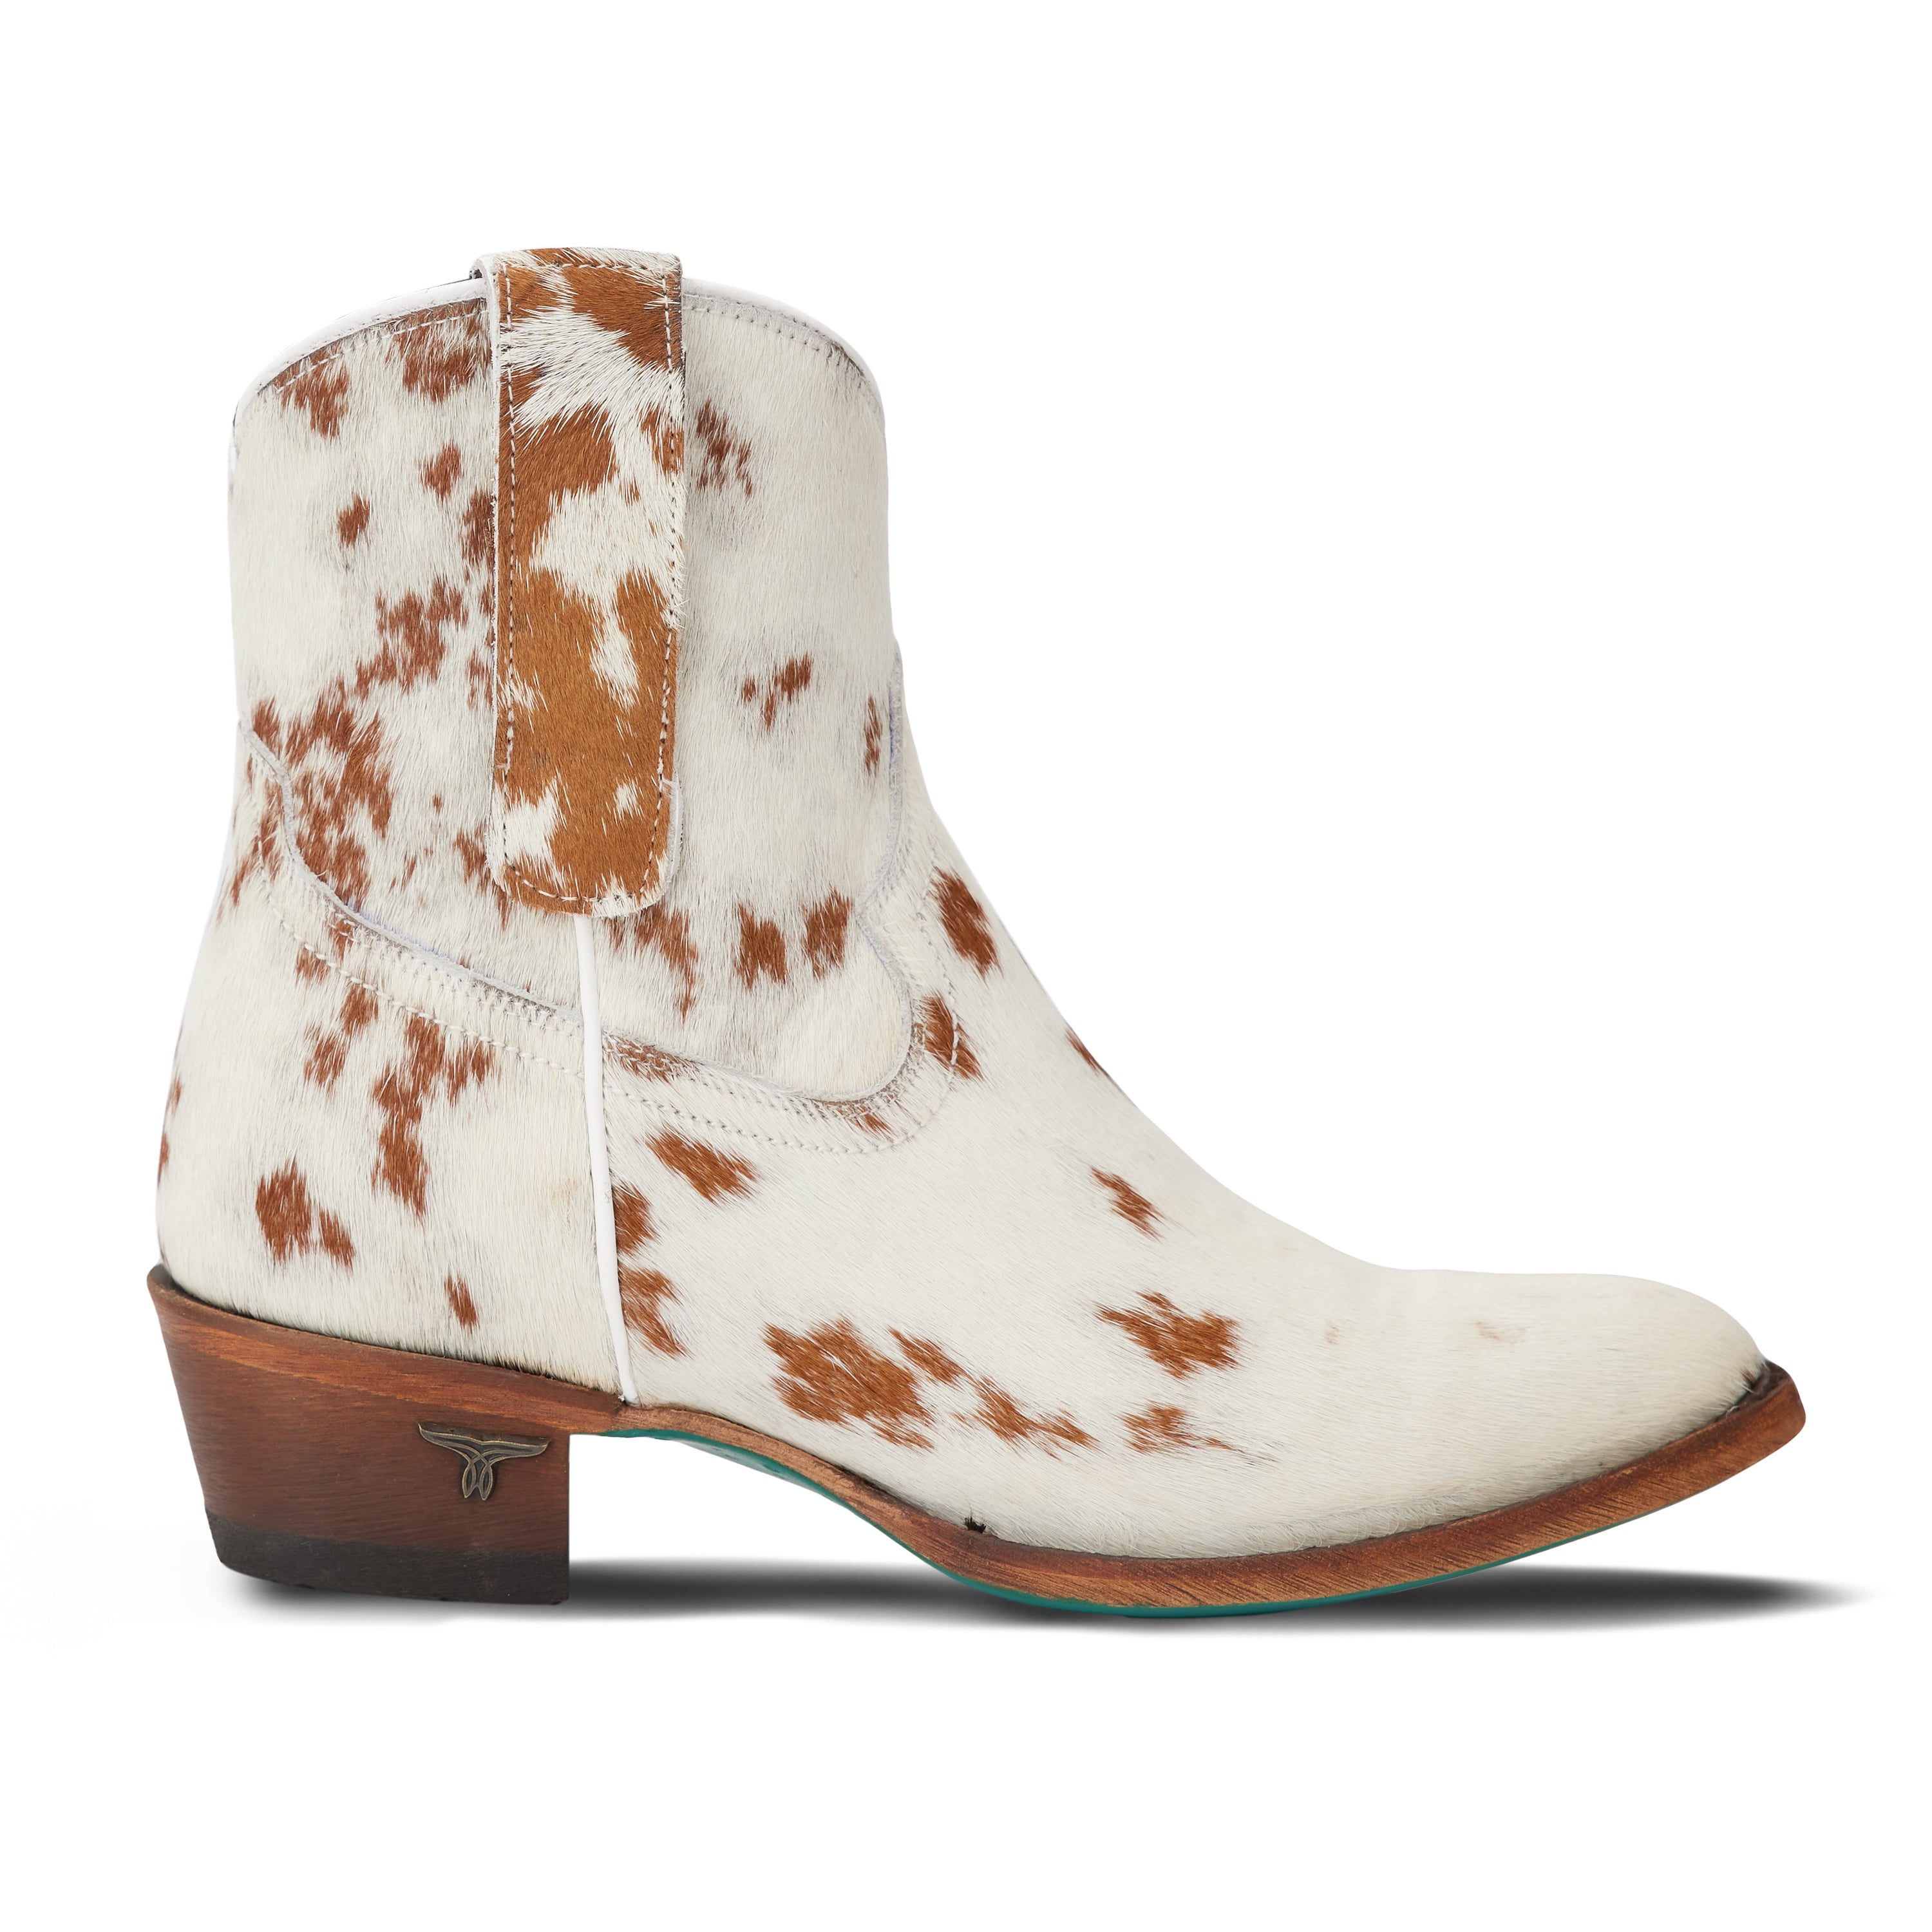 Plain Jane Bootie by Lane Boots, Cowpoke Cowgirl Boots